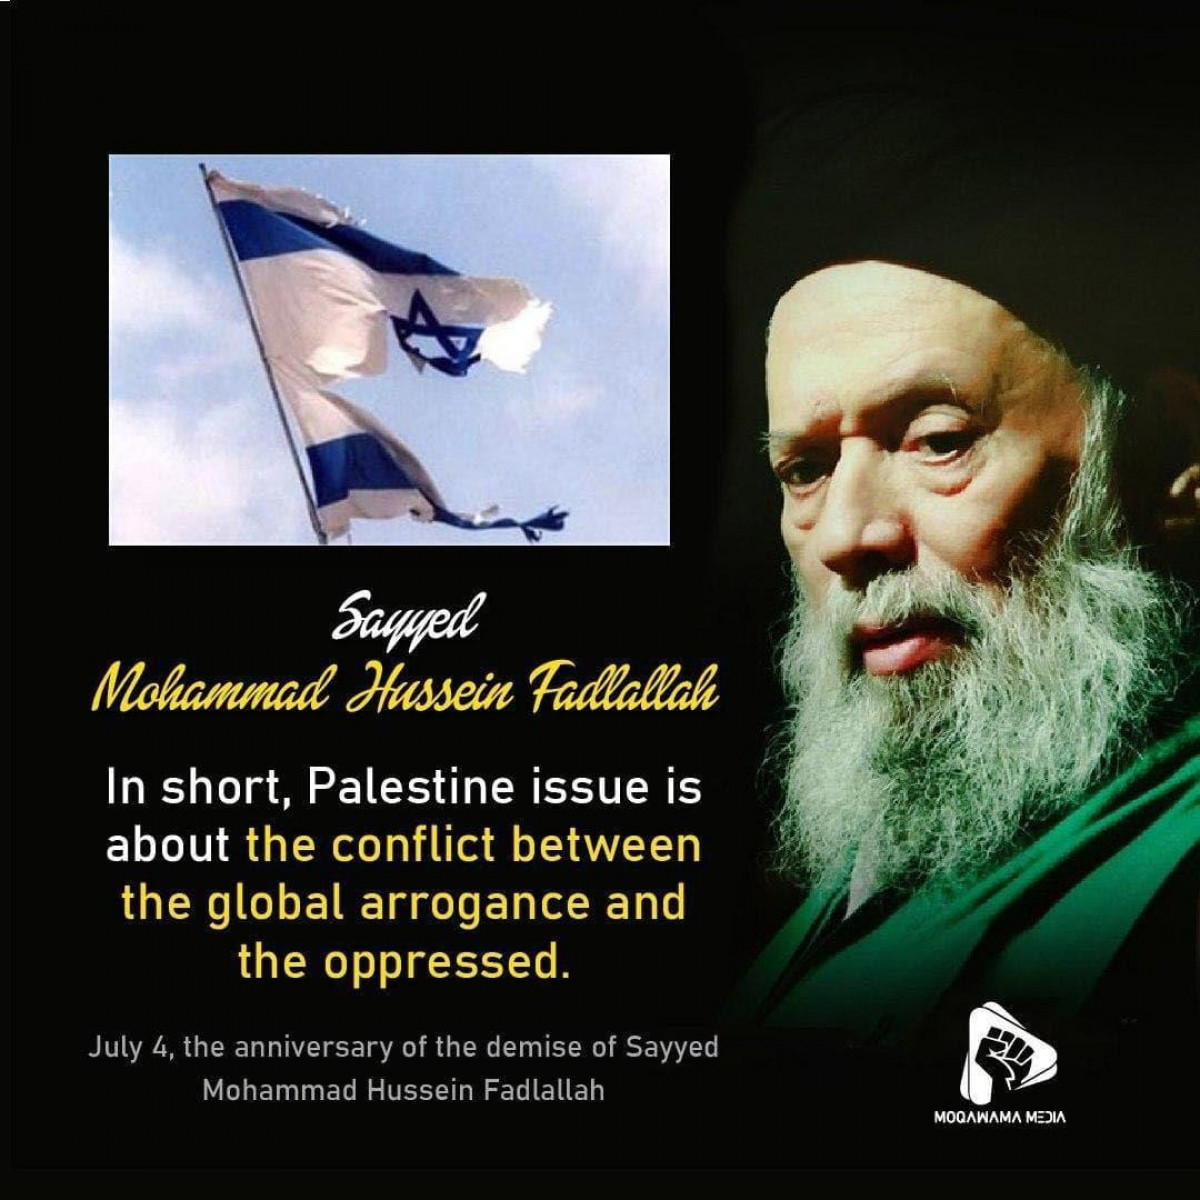 In short, Palestine issue is about the conflict between the global arrogance and the oppressed